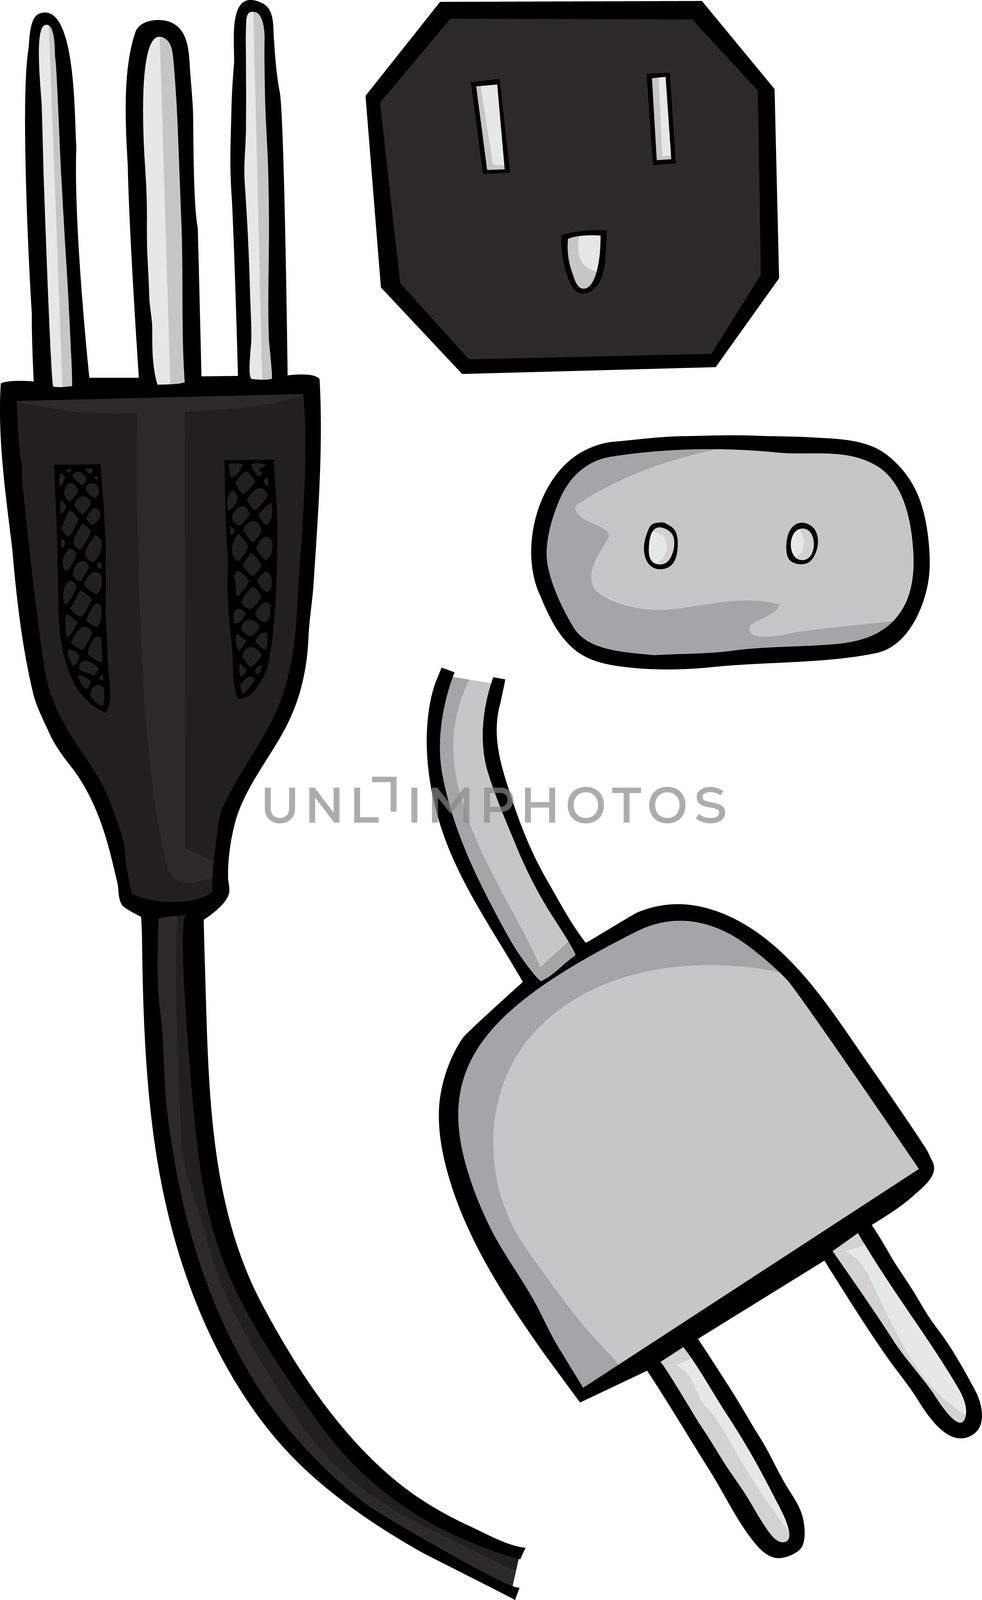 American and European standard electric plugs in profile and front view